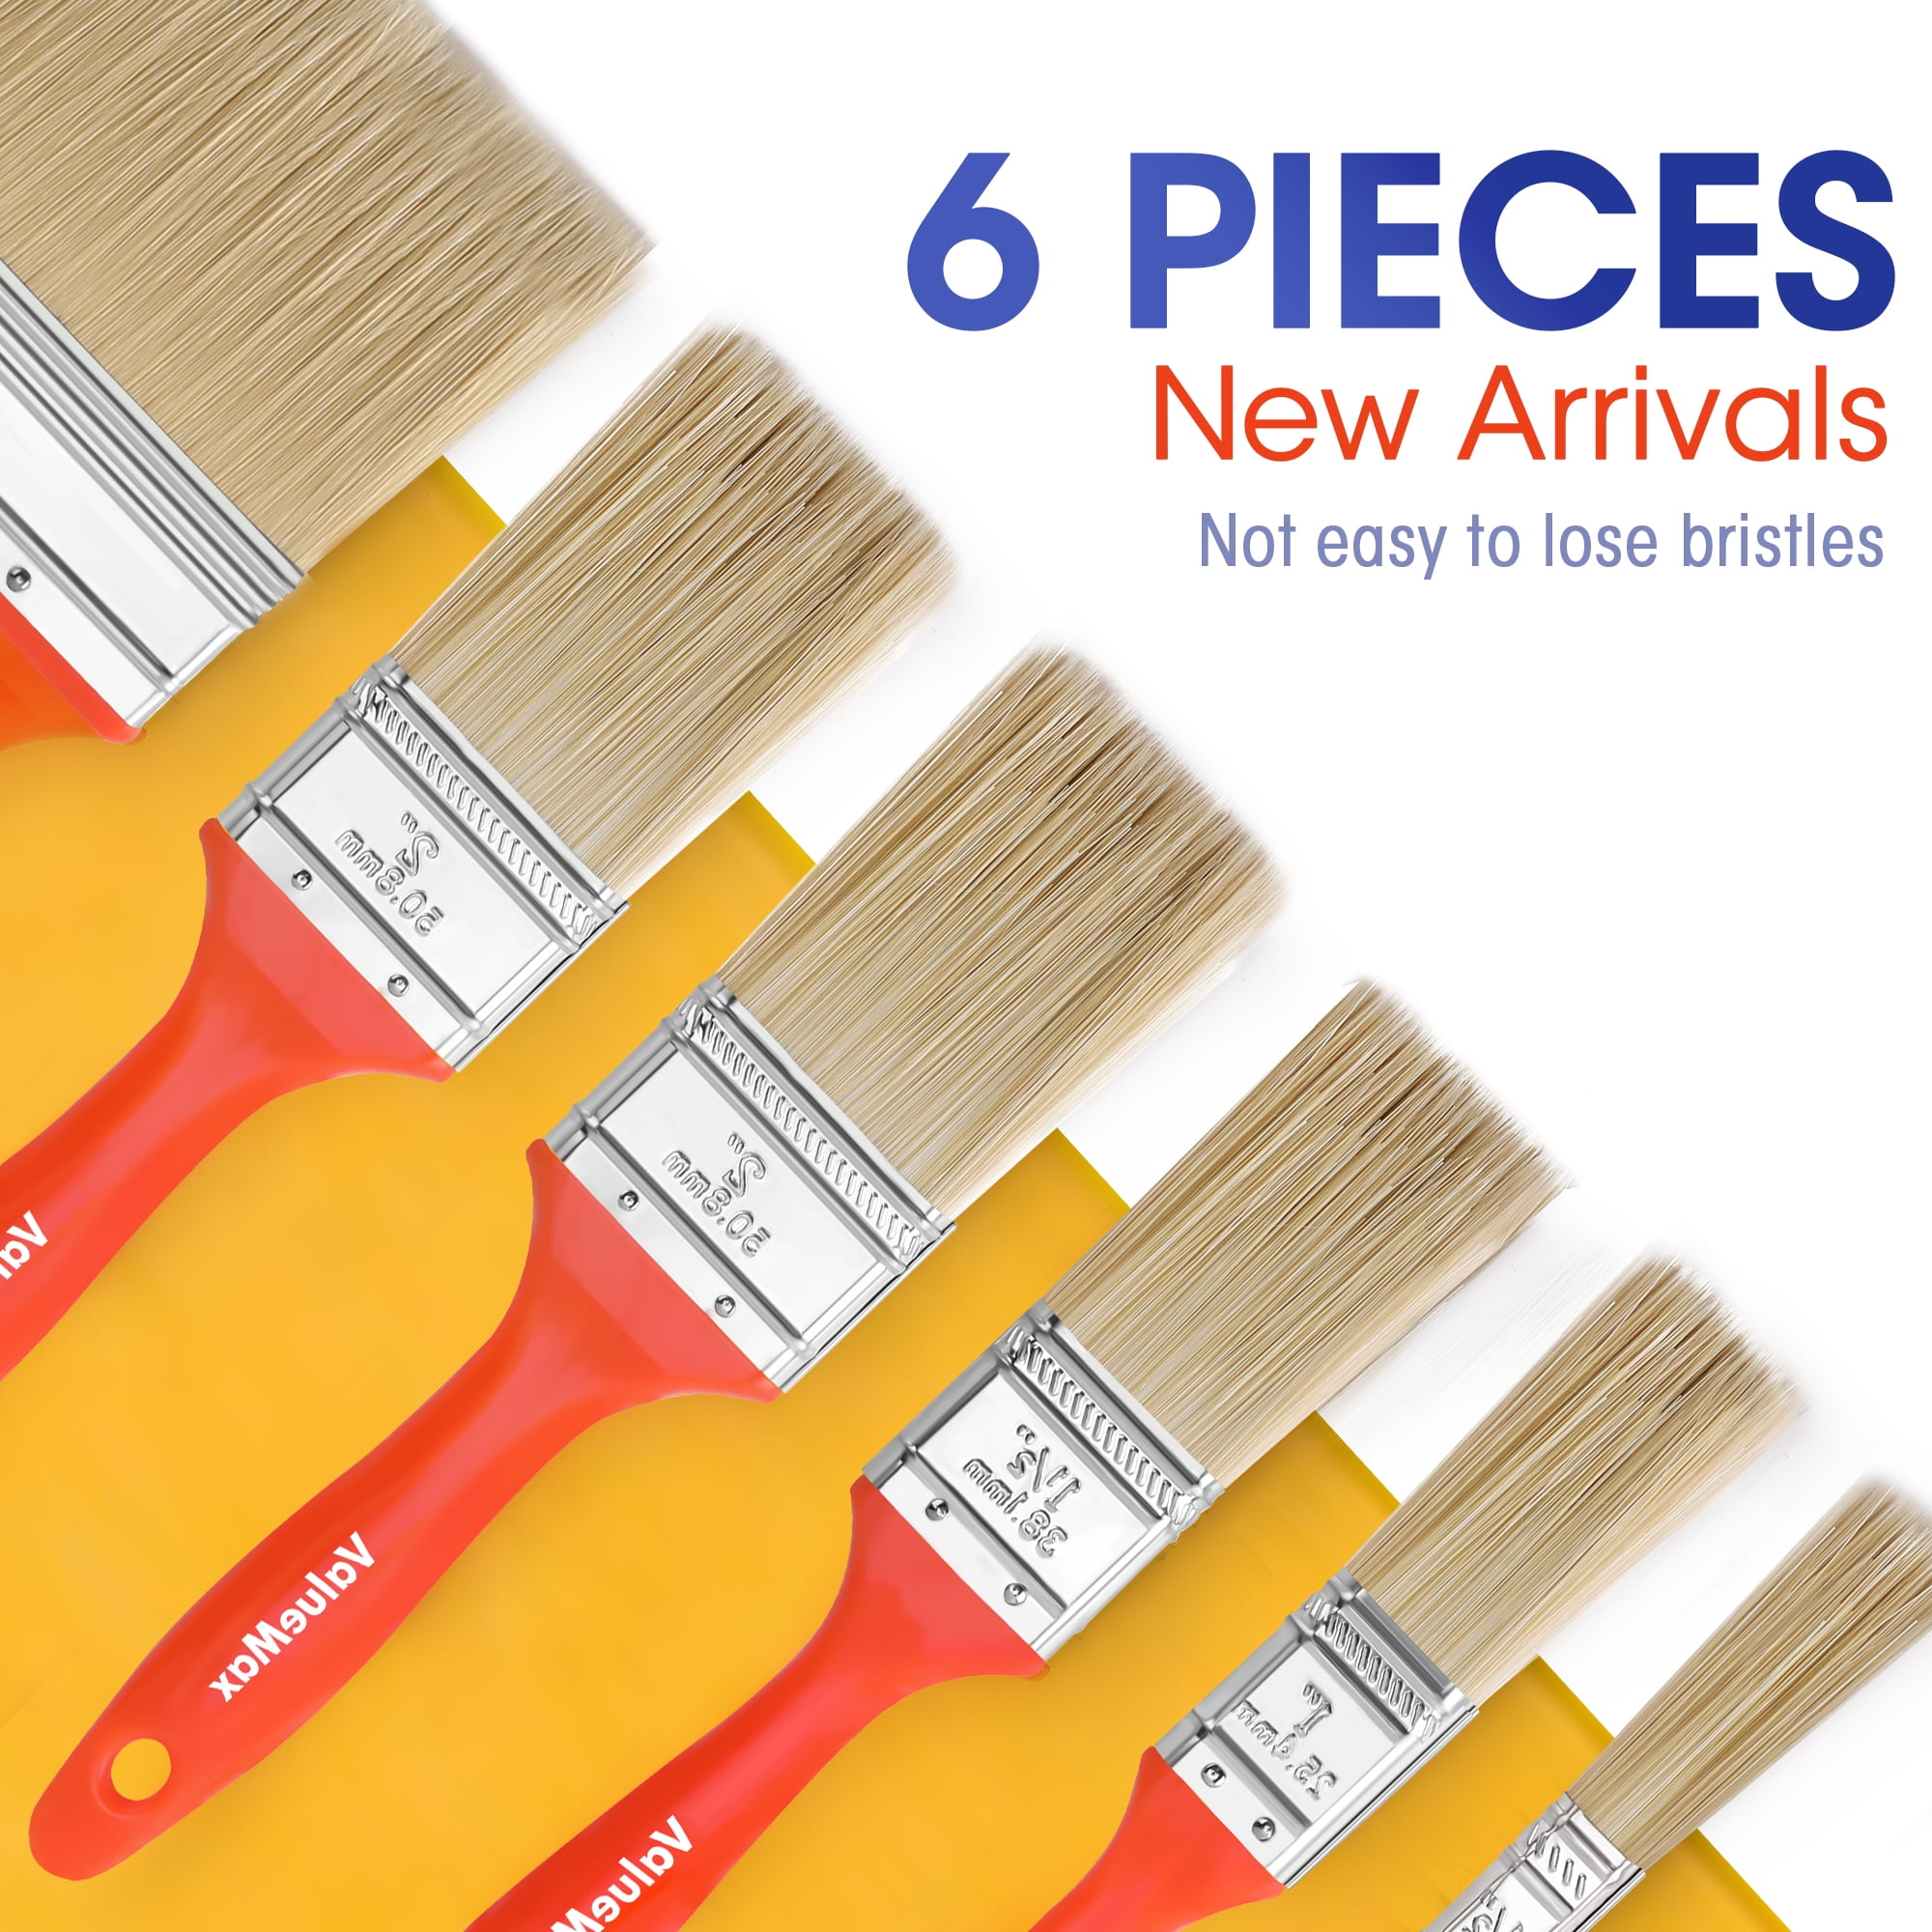 ValueMax Utility Paint Brushes Set 7-Pack, Includes Flat/ Angled Paint Brushes, Small Paintbrush, Birch Wood Handle, Thick Bristle, House Paint